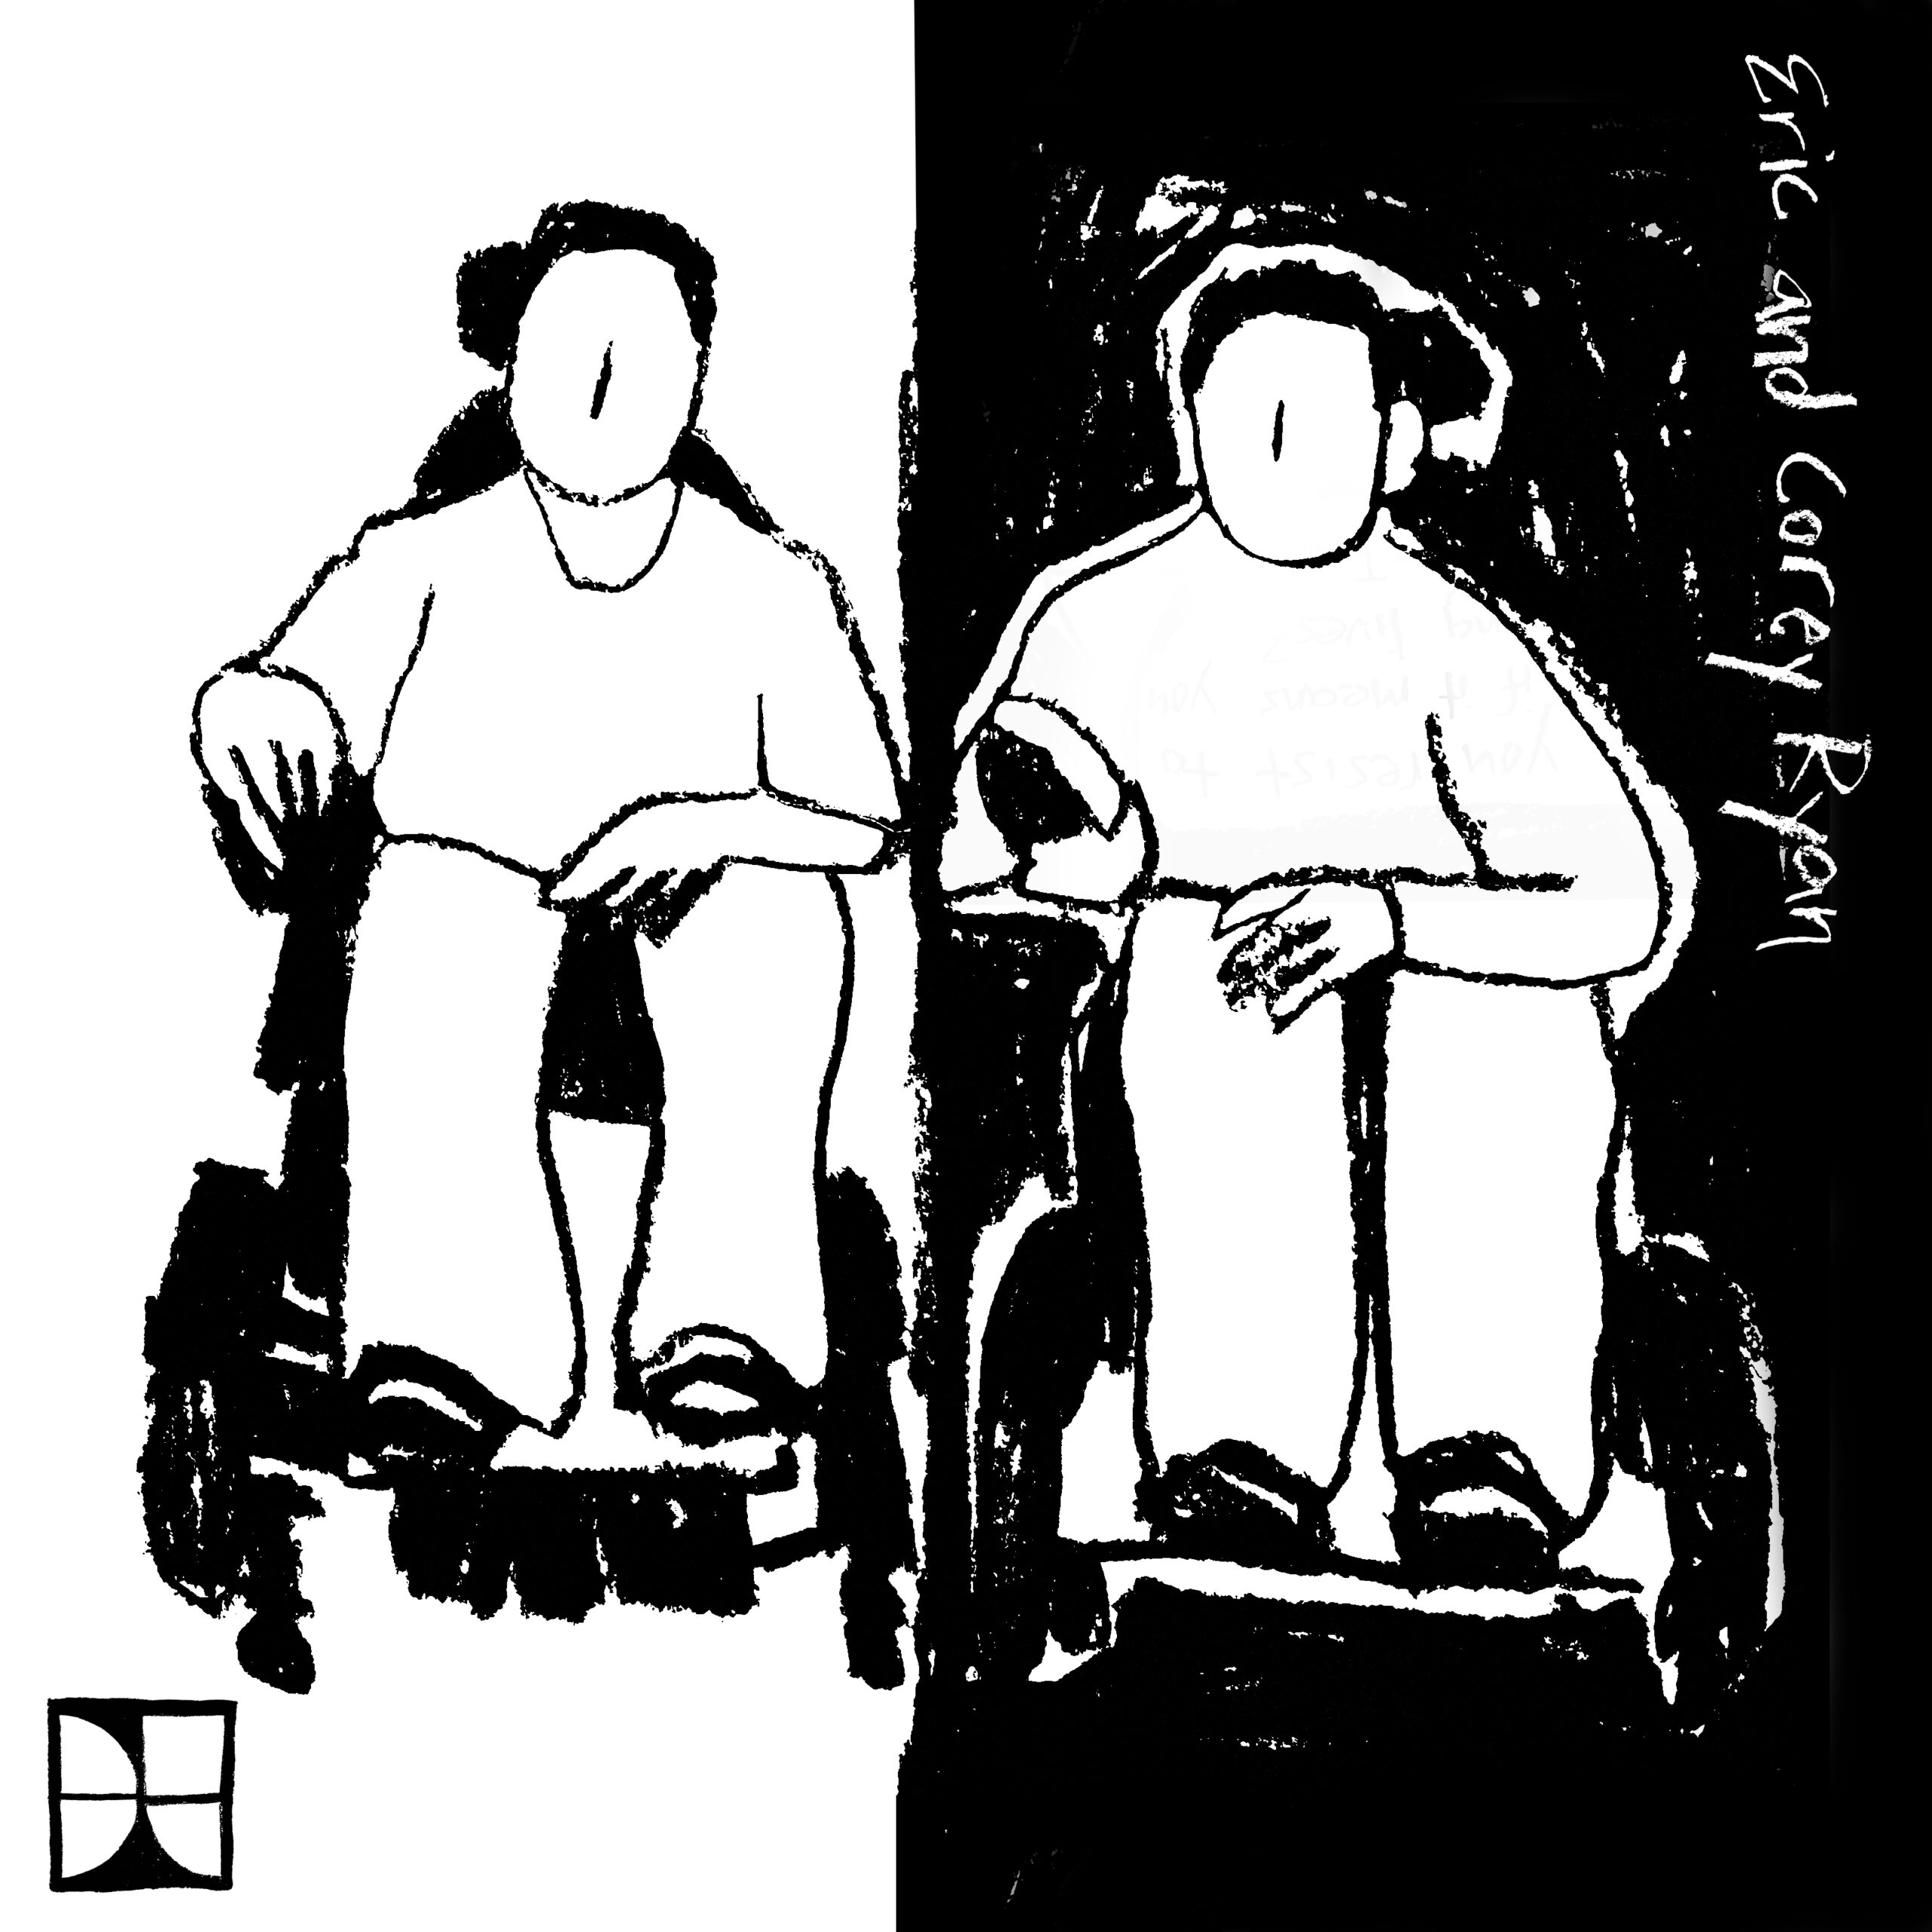 Black and white charcoal drawing. Two people sit side by side in power wheelchairs. The left half of the background is white and the right half is black. Eric and Corey Ryan are written along the upper right edge of the drawing. The DisTopia logo is in the lower left corner.